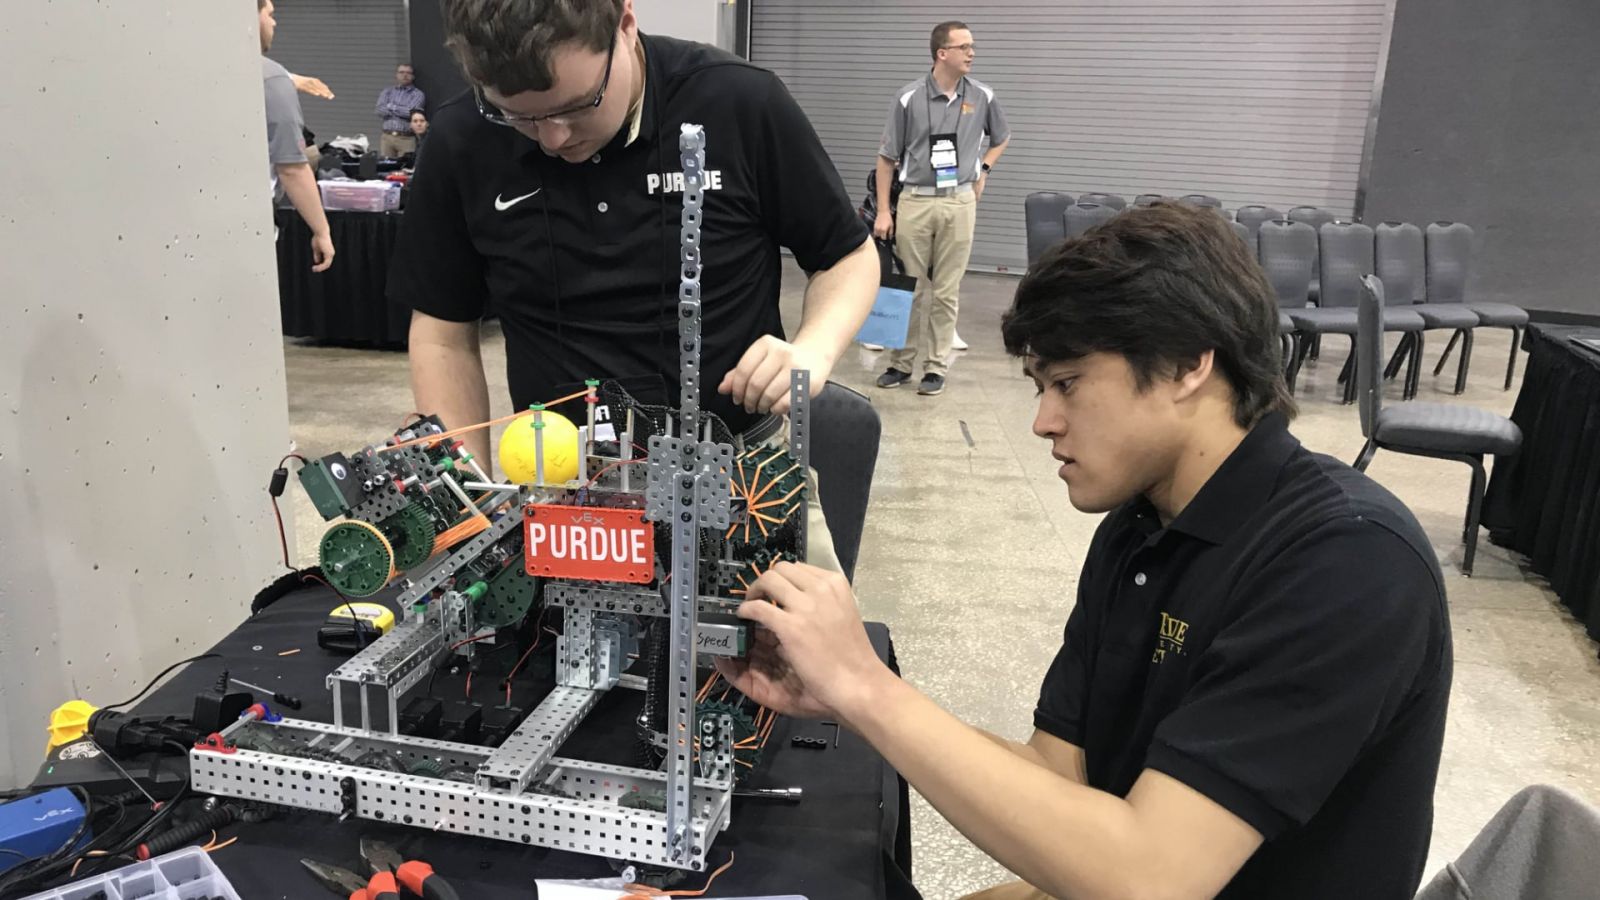 Purdue Polytechnic students Brian DeRome and Liam Rowe assemble the robotic entry at the 2019 ITEEA conference. The Purdue team took first place in the conference’s robotics competition.